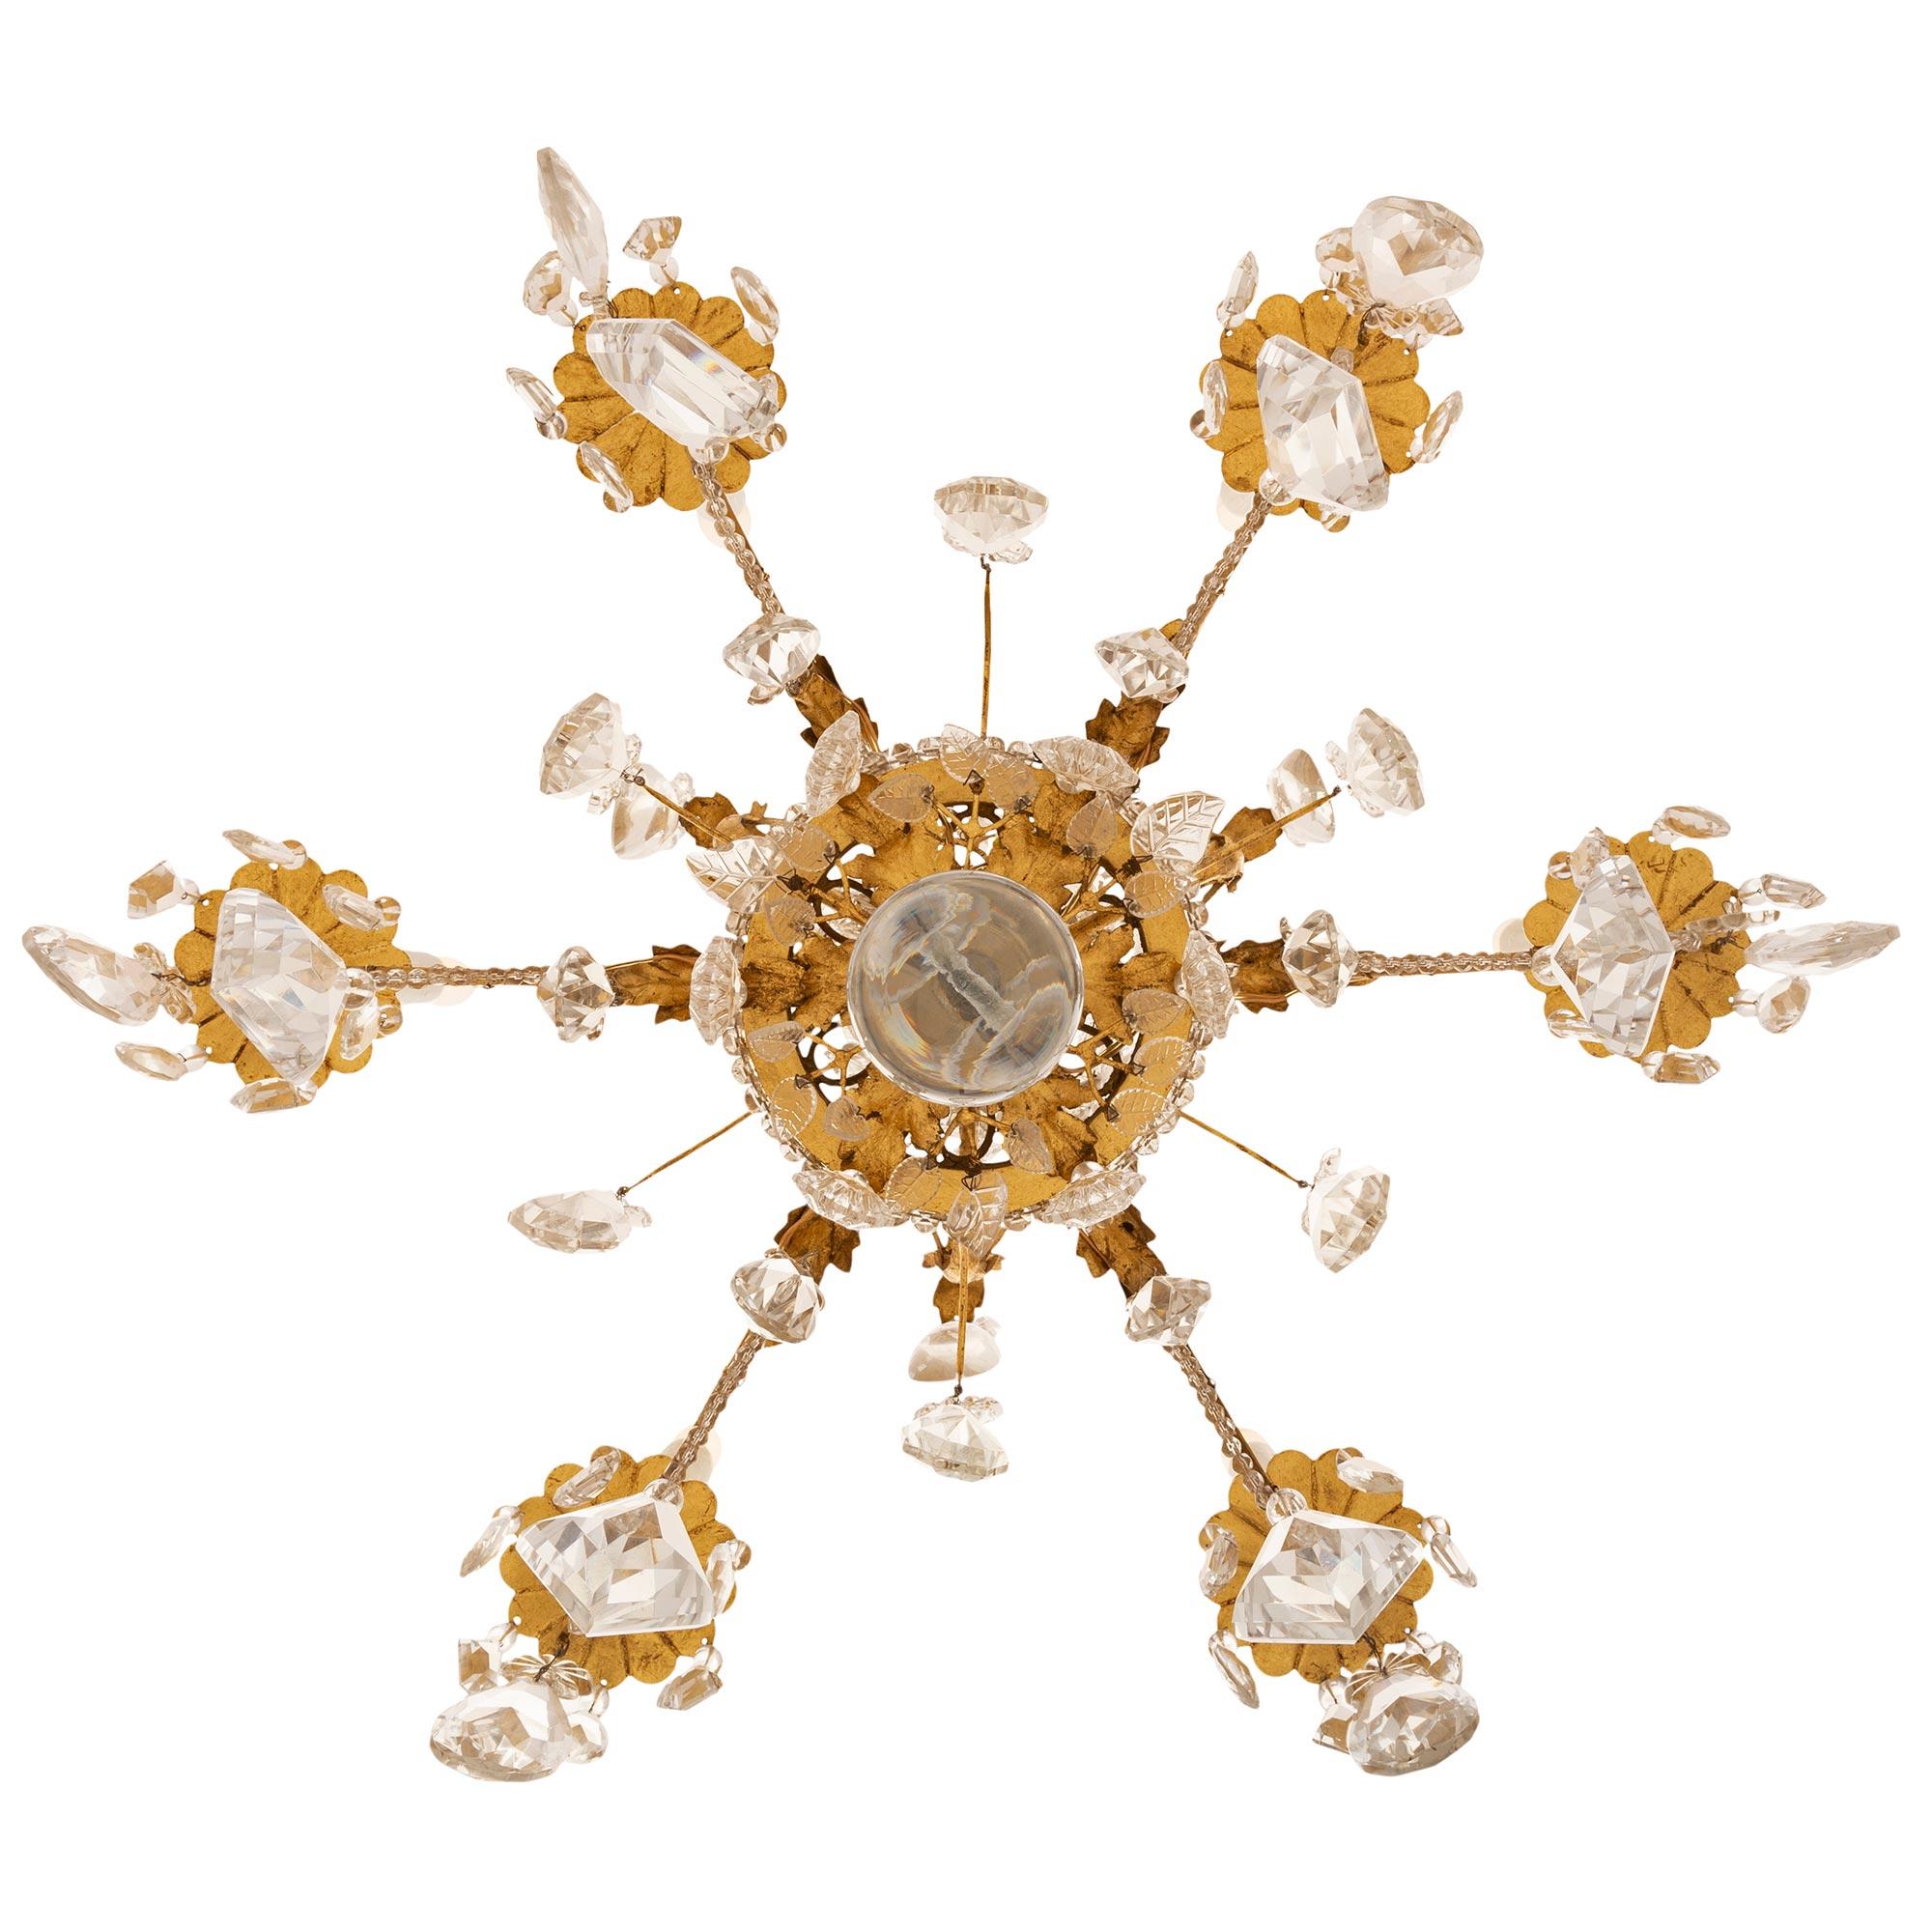 French 19th Century Louis XV St. Gilt Metal and Crystal Chandelier For Sale 6